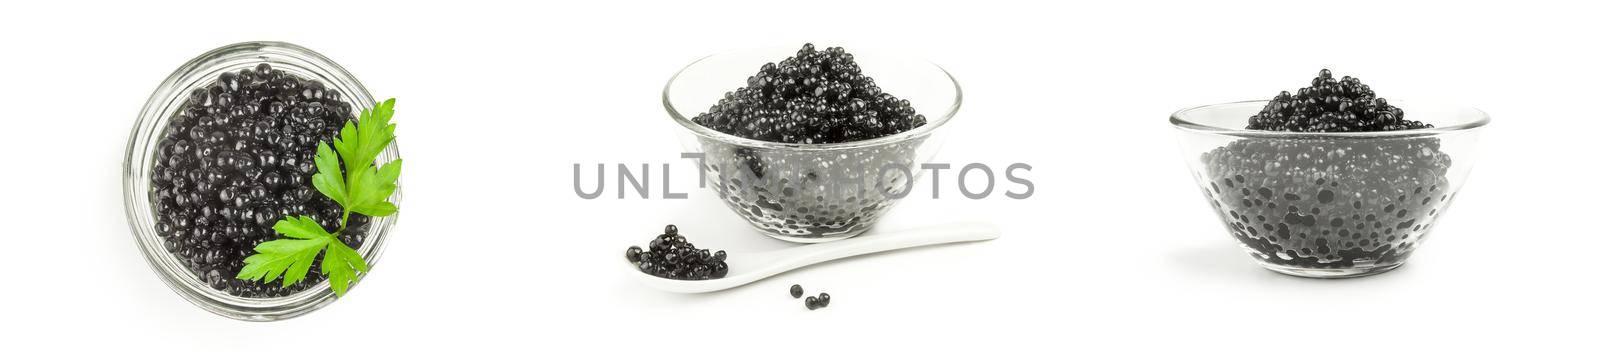 Collection of sturgeon caviar isolated over a white background by Proff